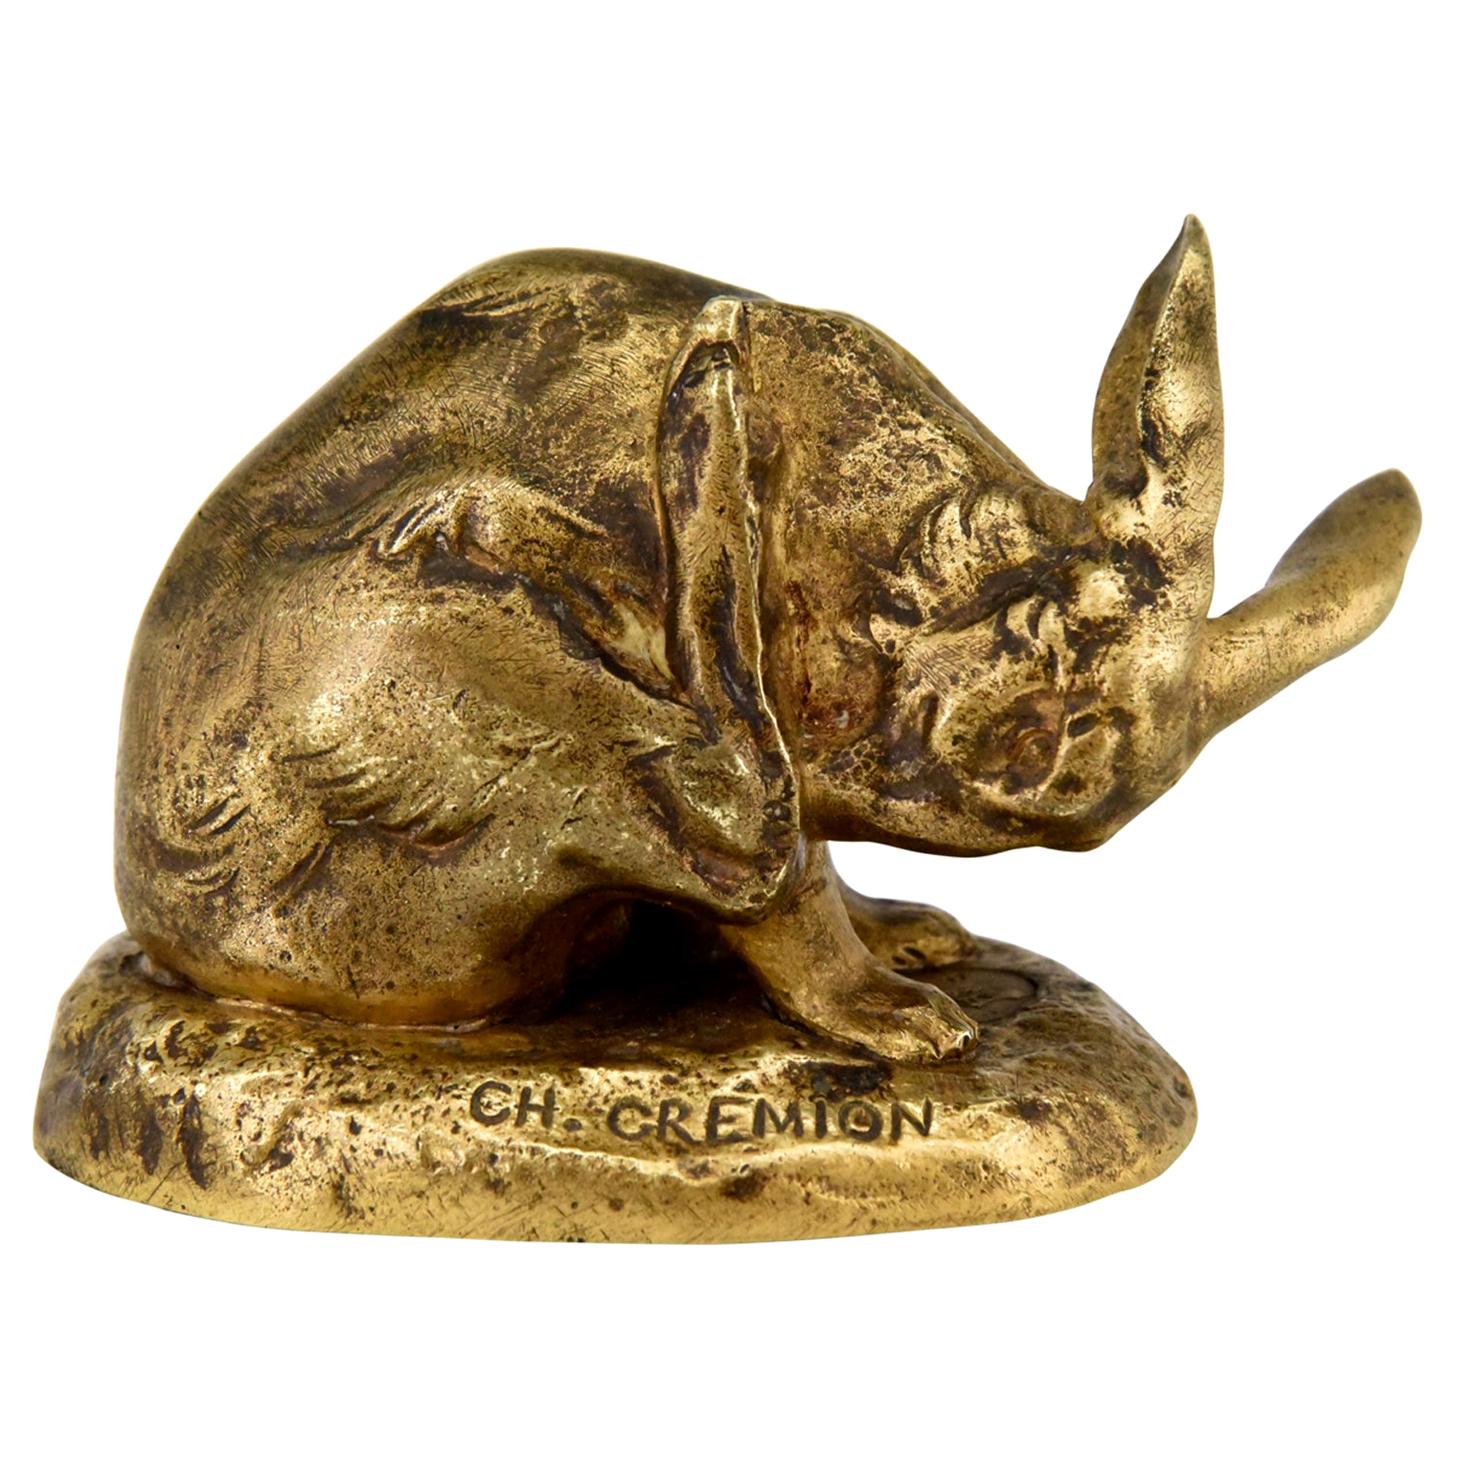 Antique Bronze Sculpture of a Hare Washing Charles Gremion, France, 1900